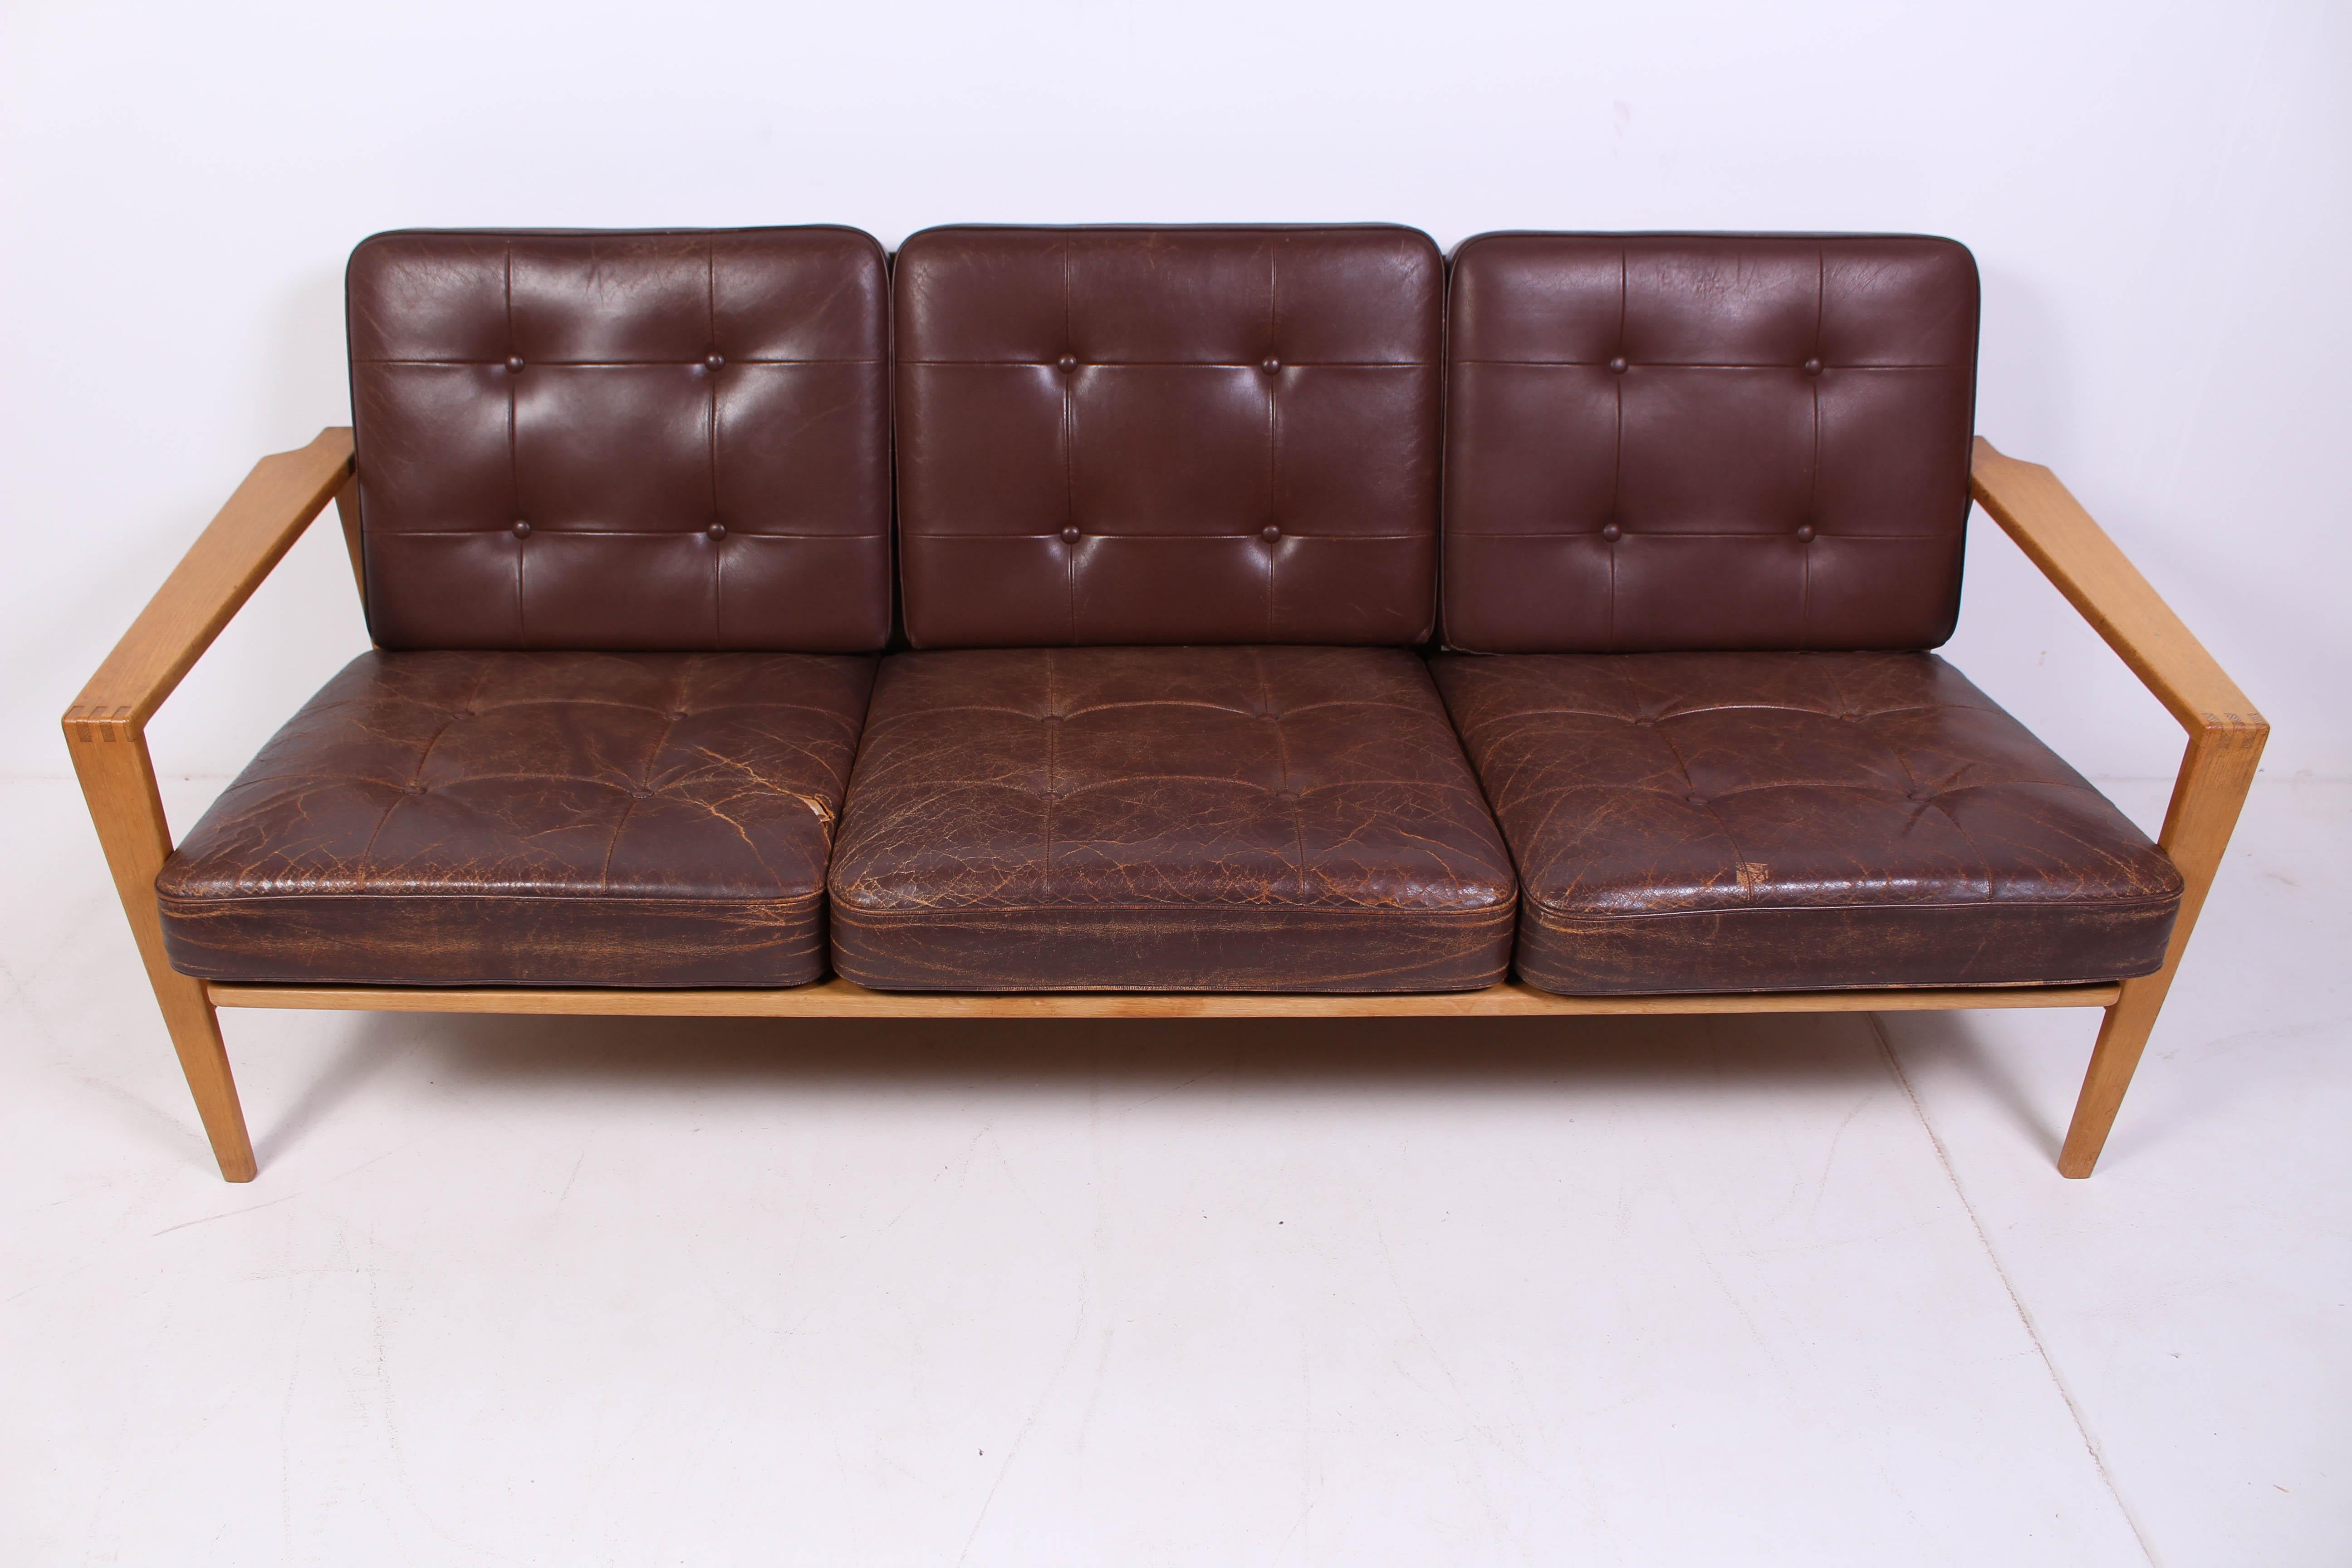 Oak and brown leather sofa by Danish designer Erik Wørtz. The model is called Kastrup. The oak frame and the back cushions are in good vintage conditions but the seat cushions have heavy signs of usage and tares and could be in need of upholstery.